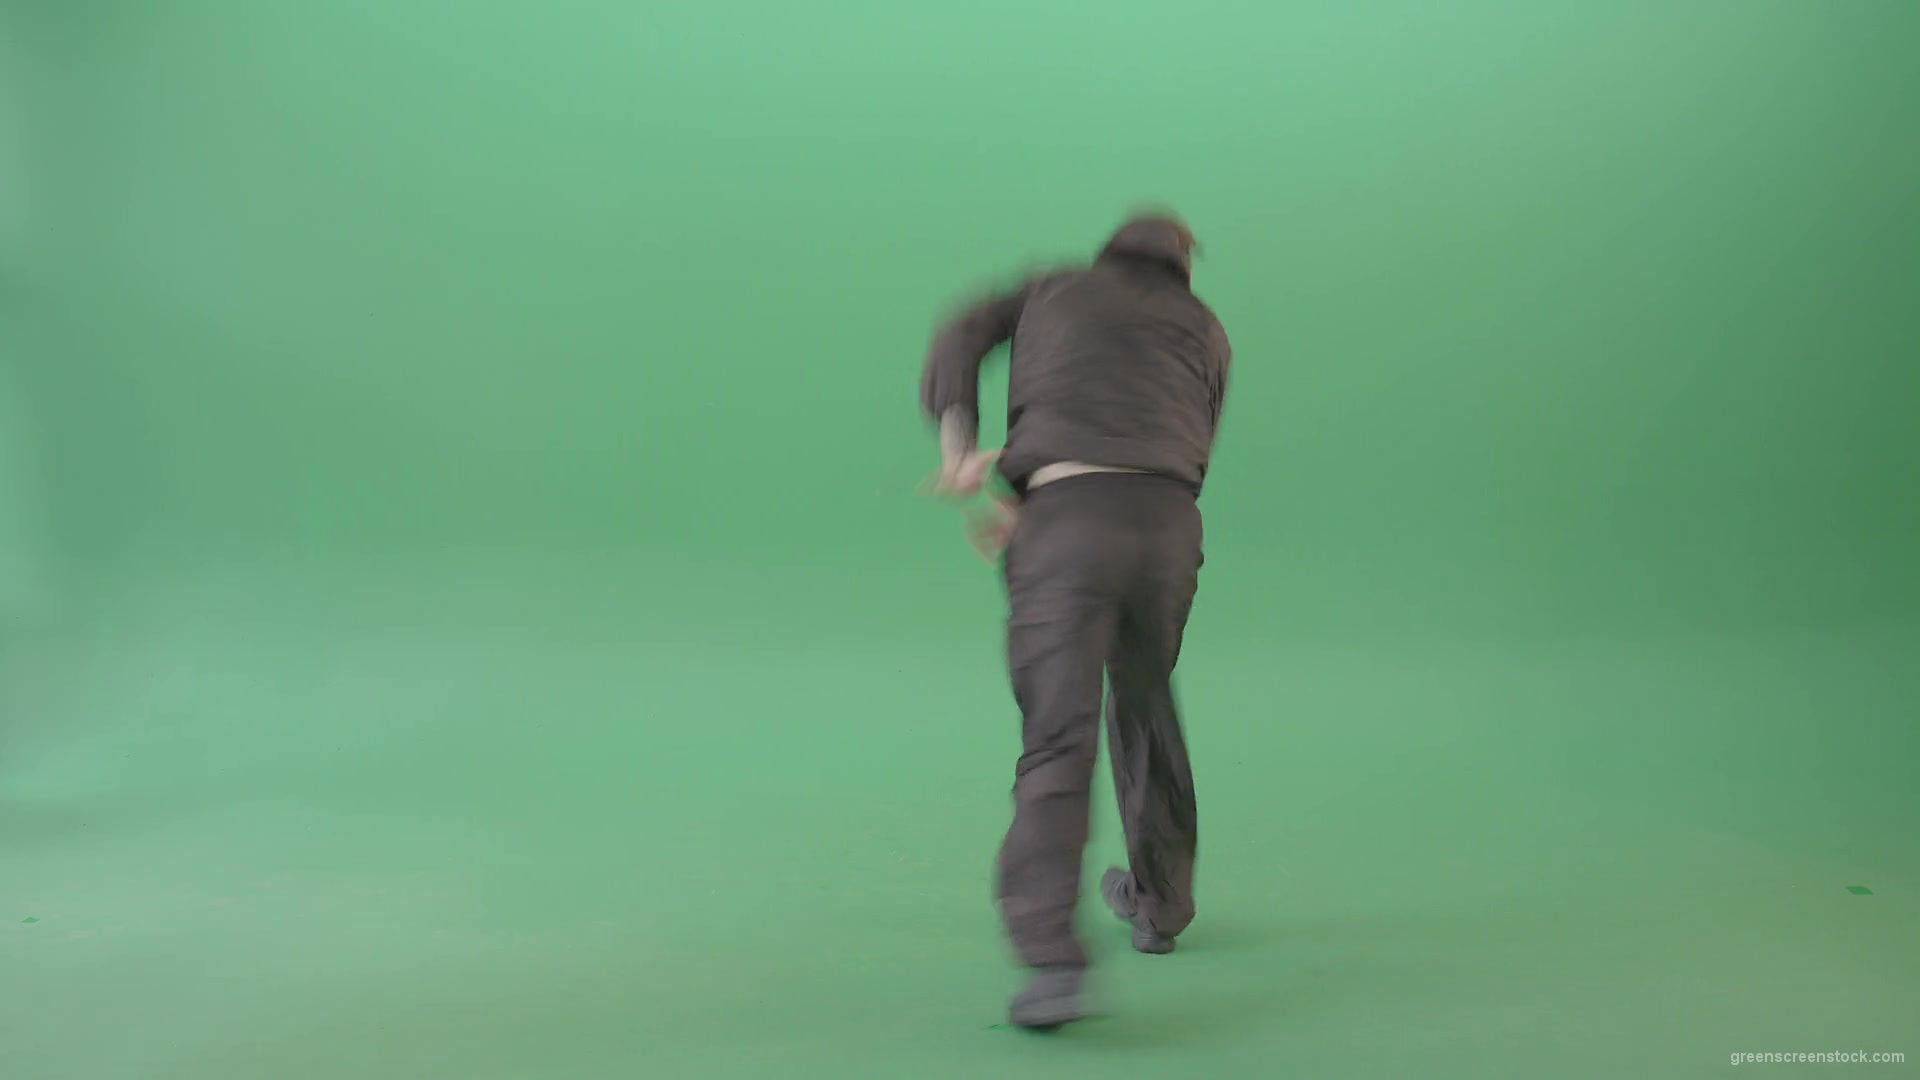 Athlete-Man-making-Air-freeze-on-hand-breaking-on-green-screen-4K-Video-Footage-1920_009 Green Screen Stock